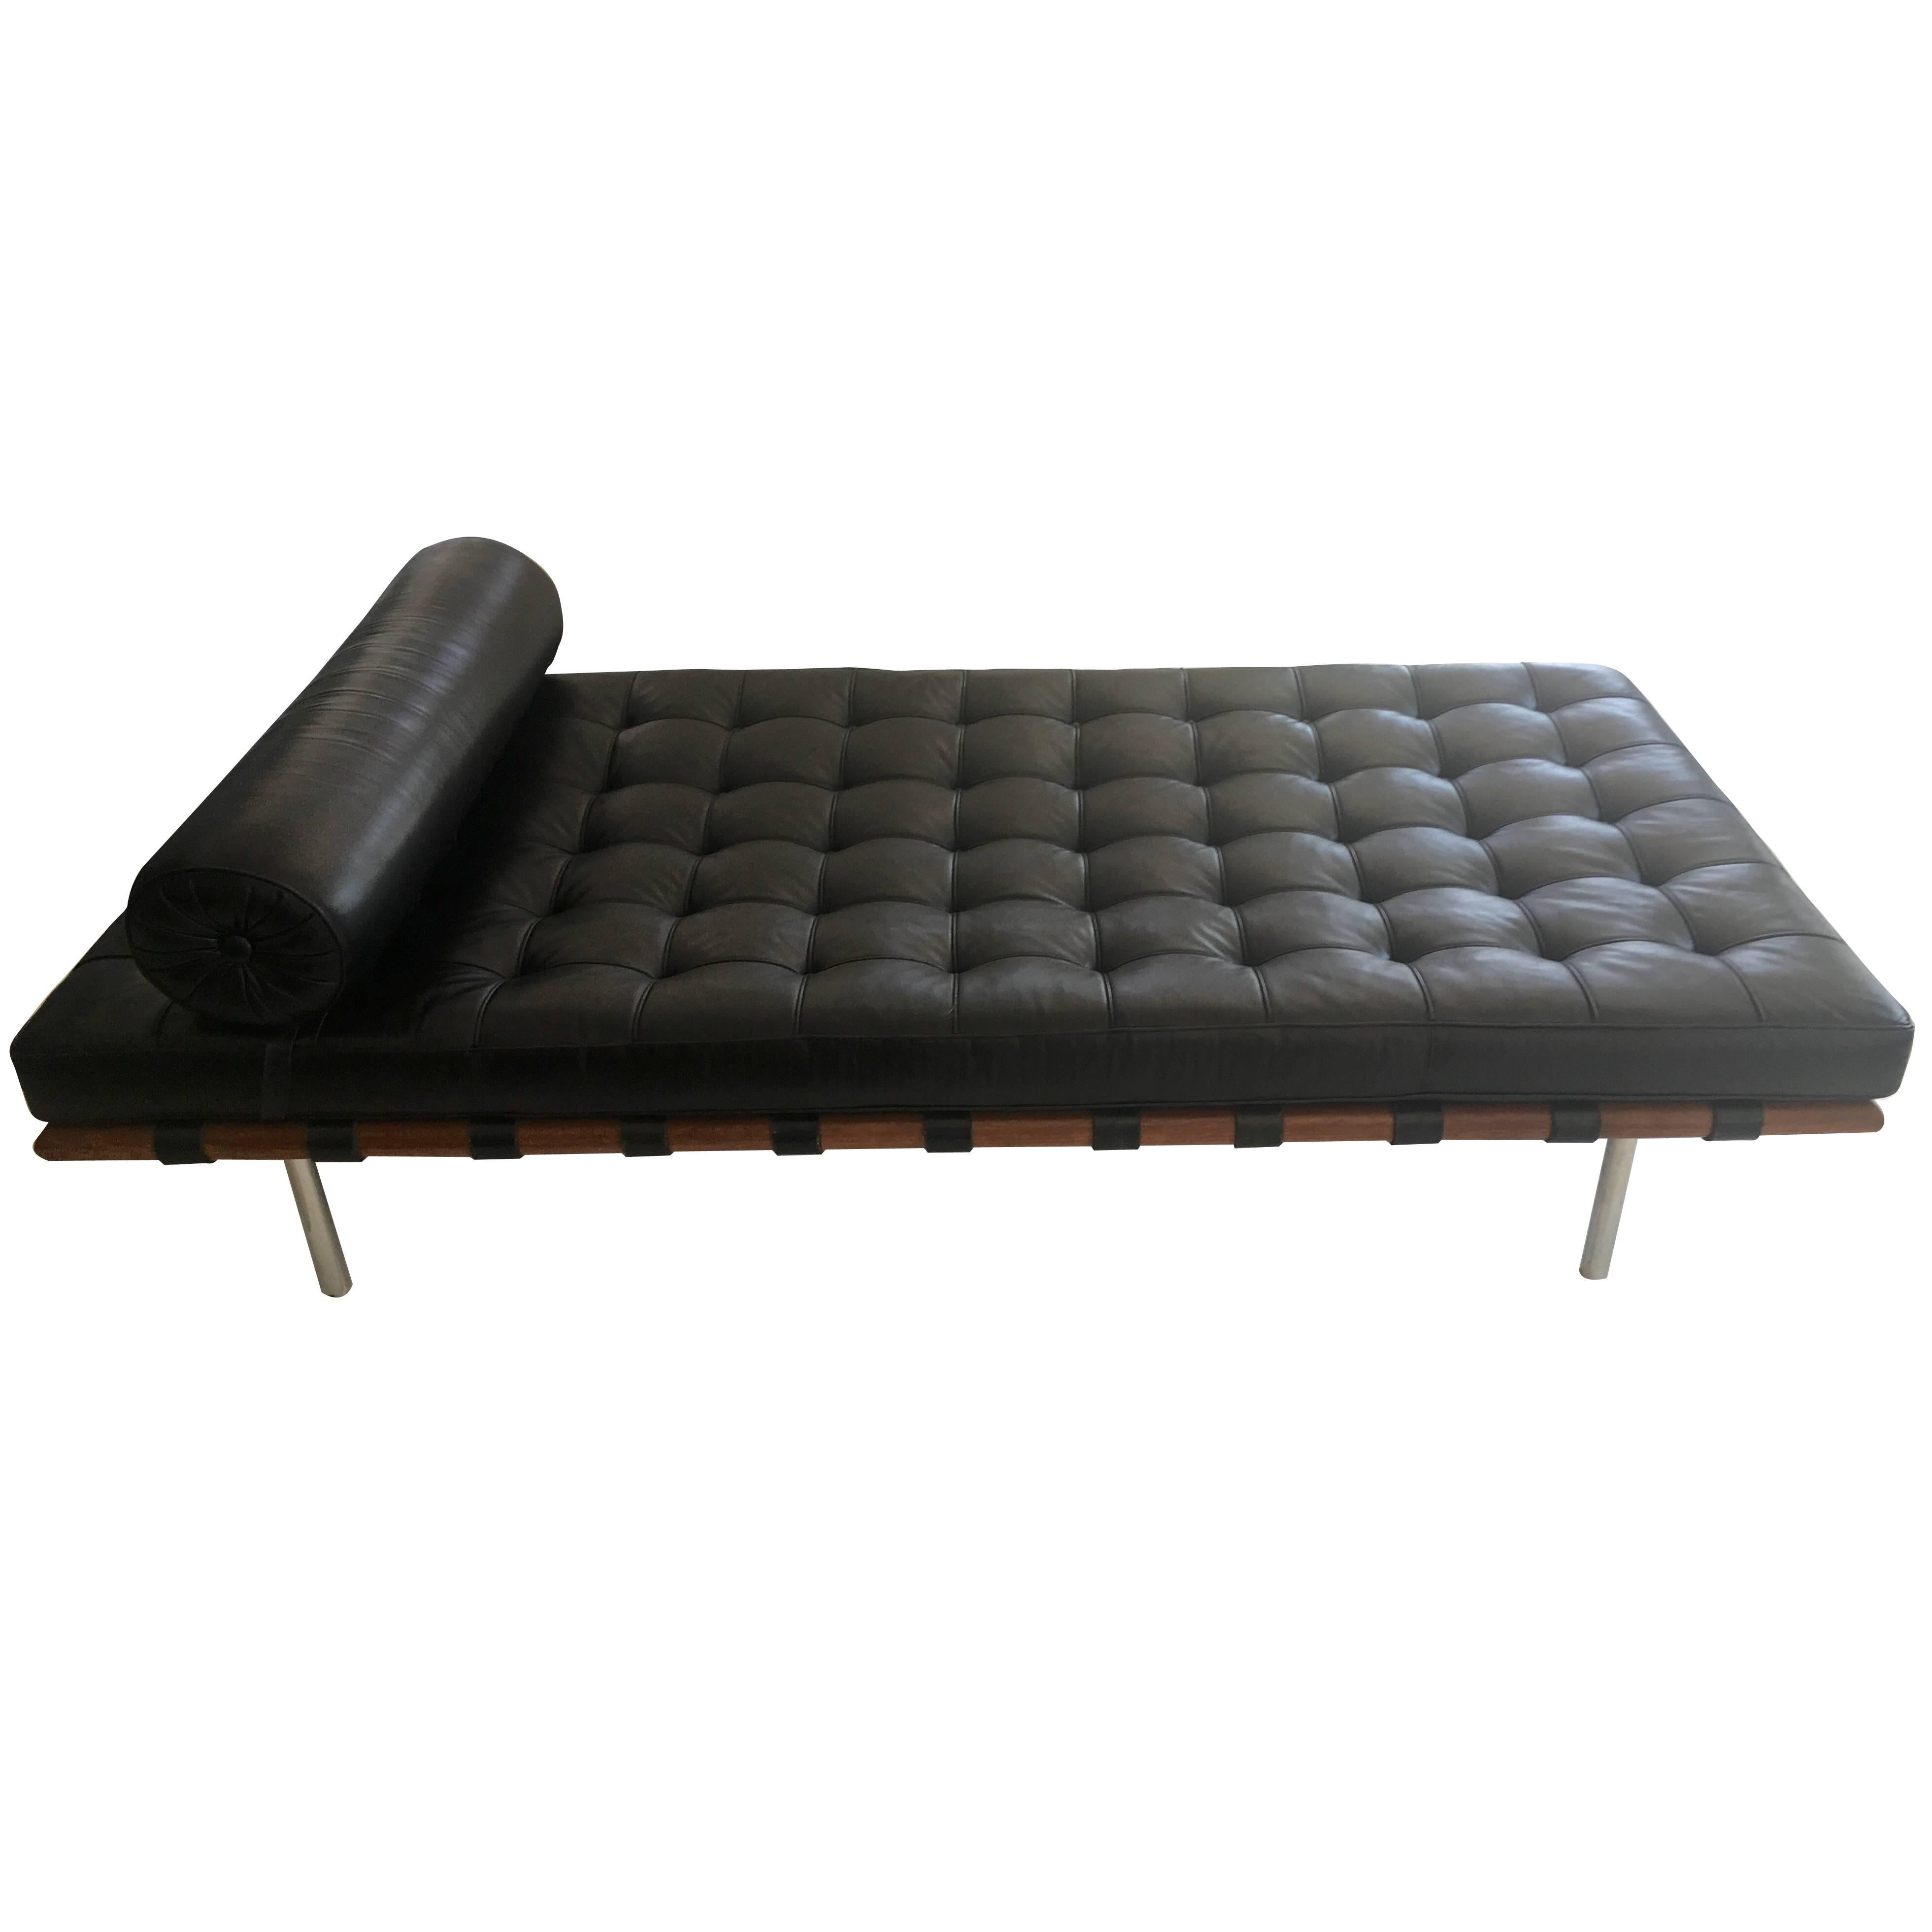 Ludwig Mies van der Rohe Daybed